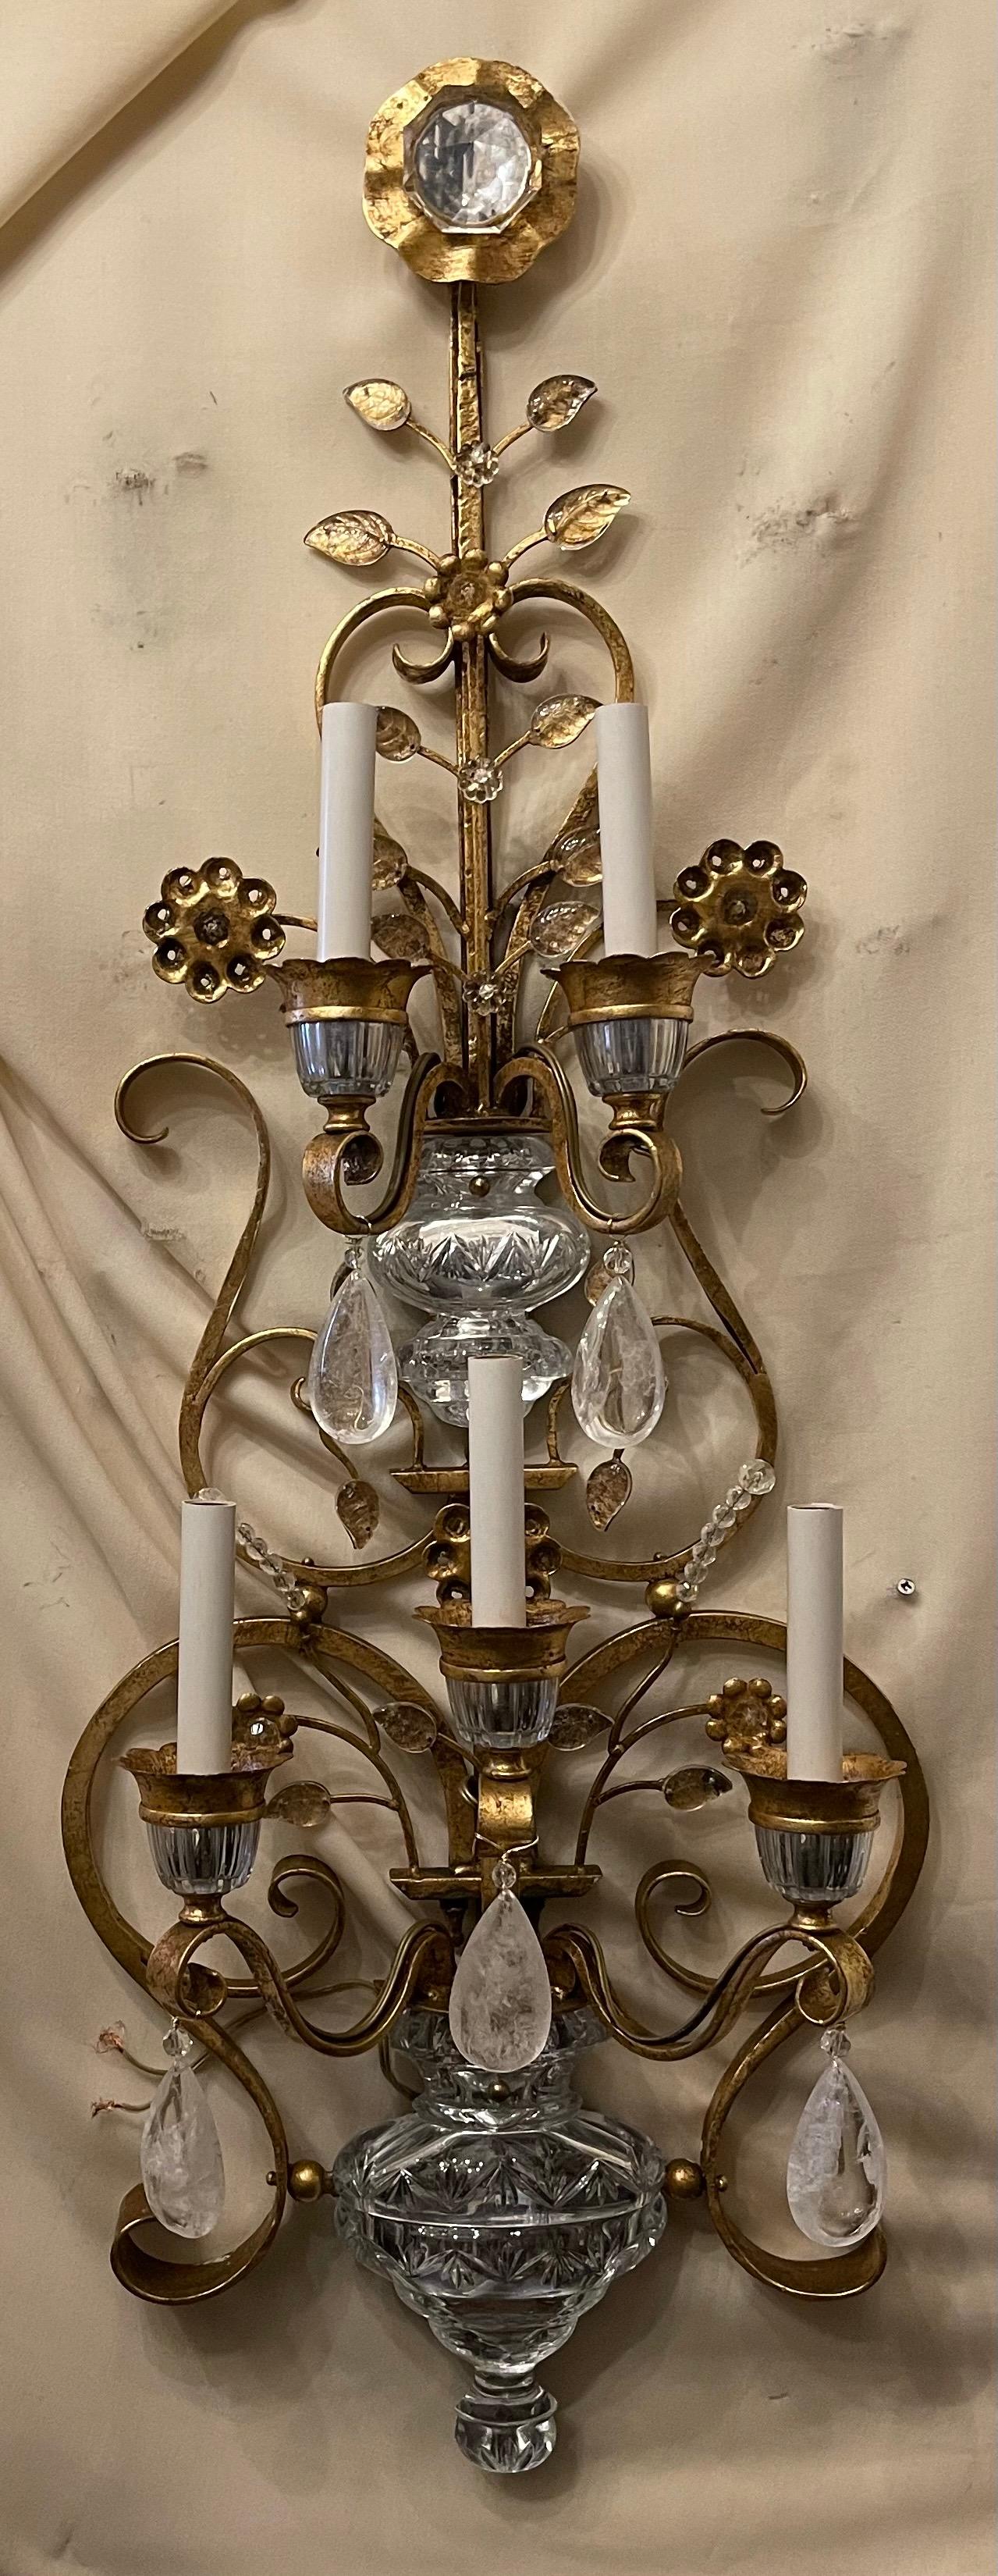 A Wonderful Very Large Pair Italian Rock Crystal And Crystal Baguès Style Urn & Flower With Gold Leaf Gilt 5 Candelabra Sconces